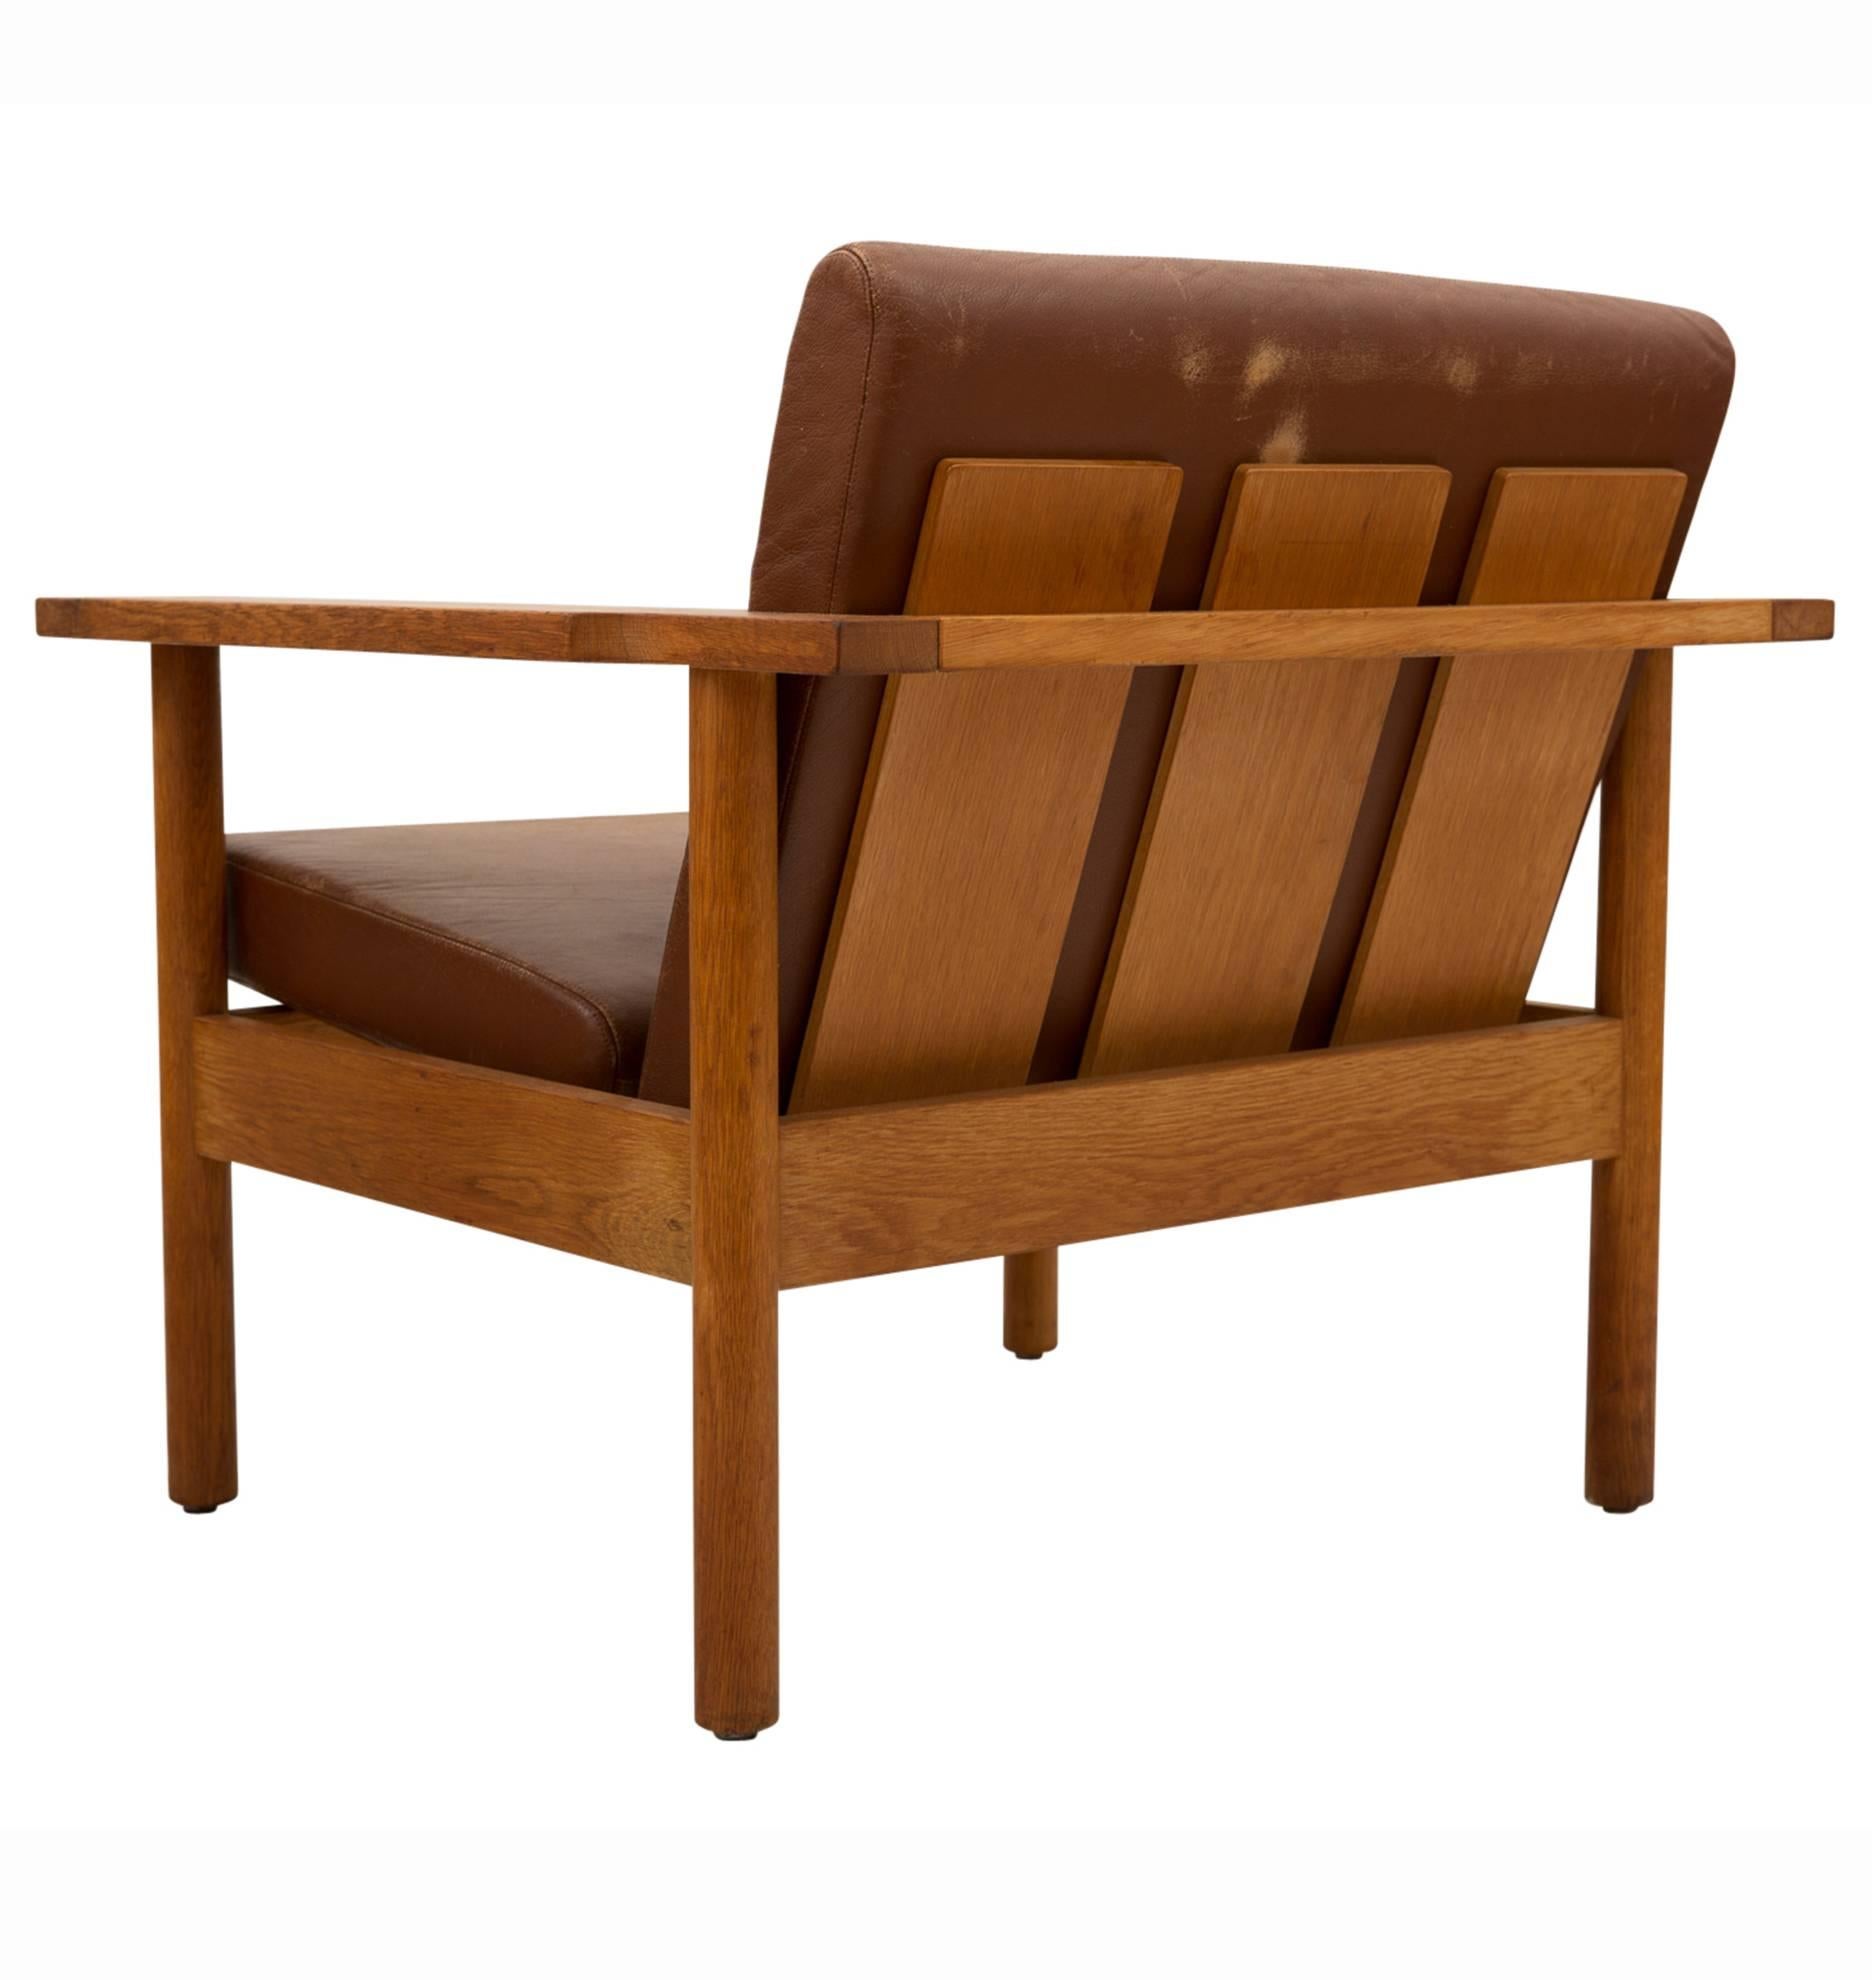 Similar to designs by Scandinavian greats like Borge Mogensen, these gorgeous solid oak and bentwood armchairs feature fantastic mid-century forms, simple construction and their original leather cushions. The seats themselves are rather unique: